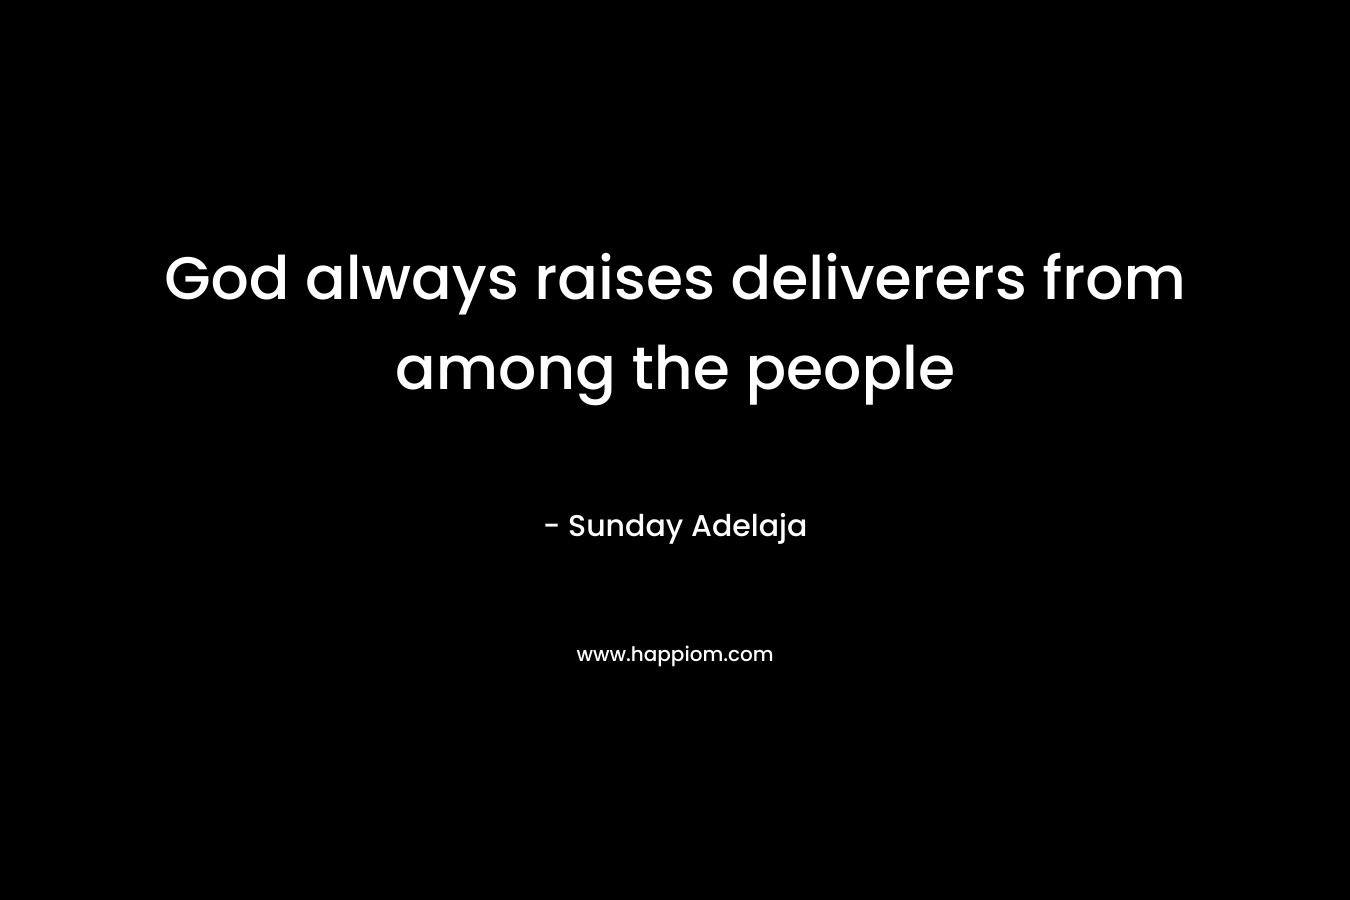 God always raises deliverers from among the people